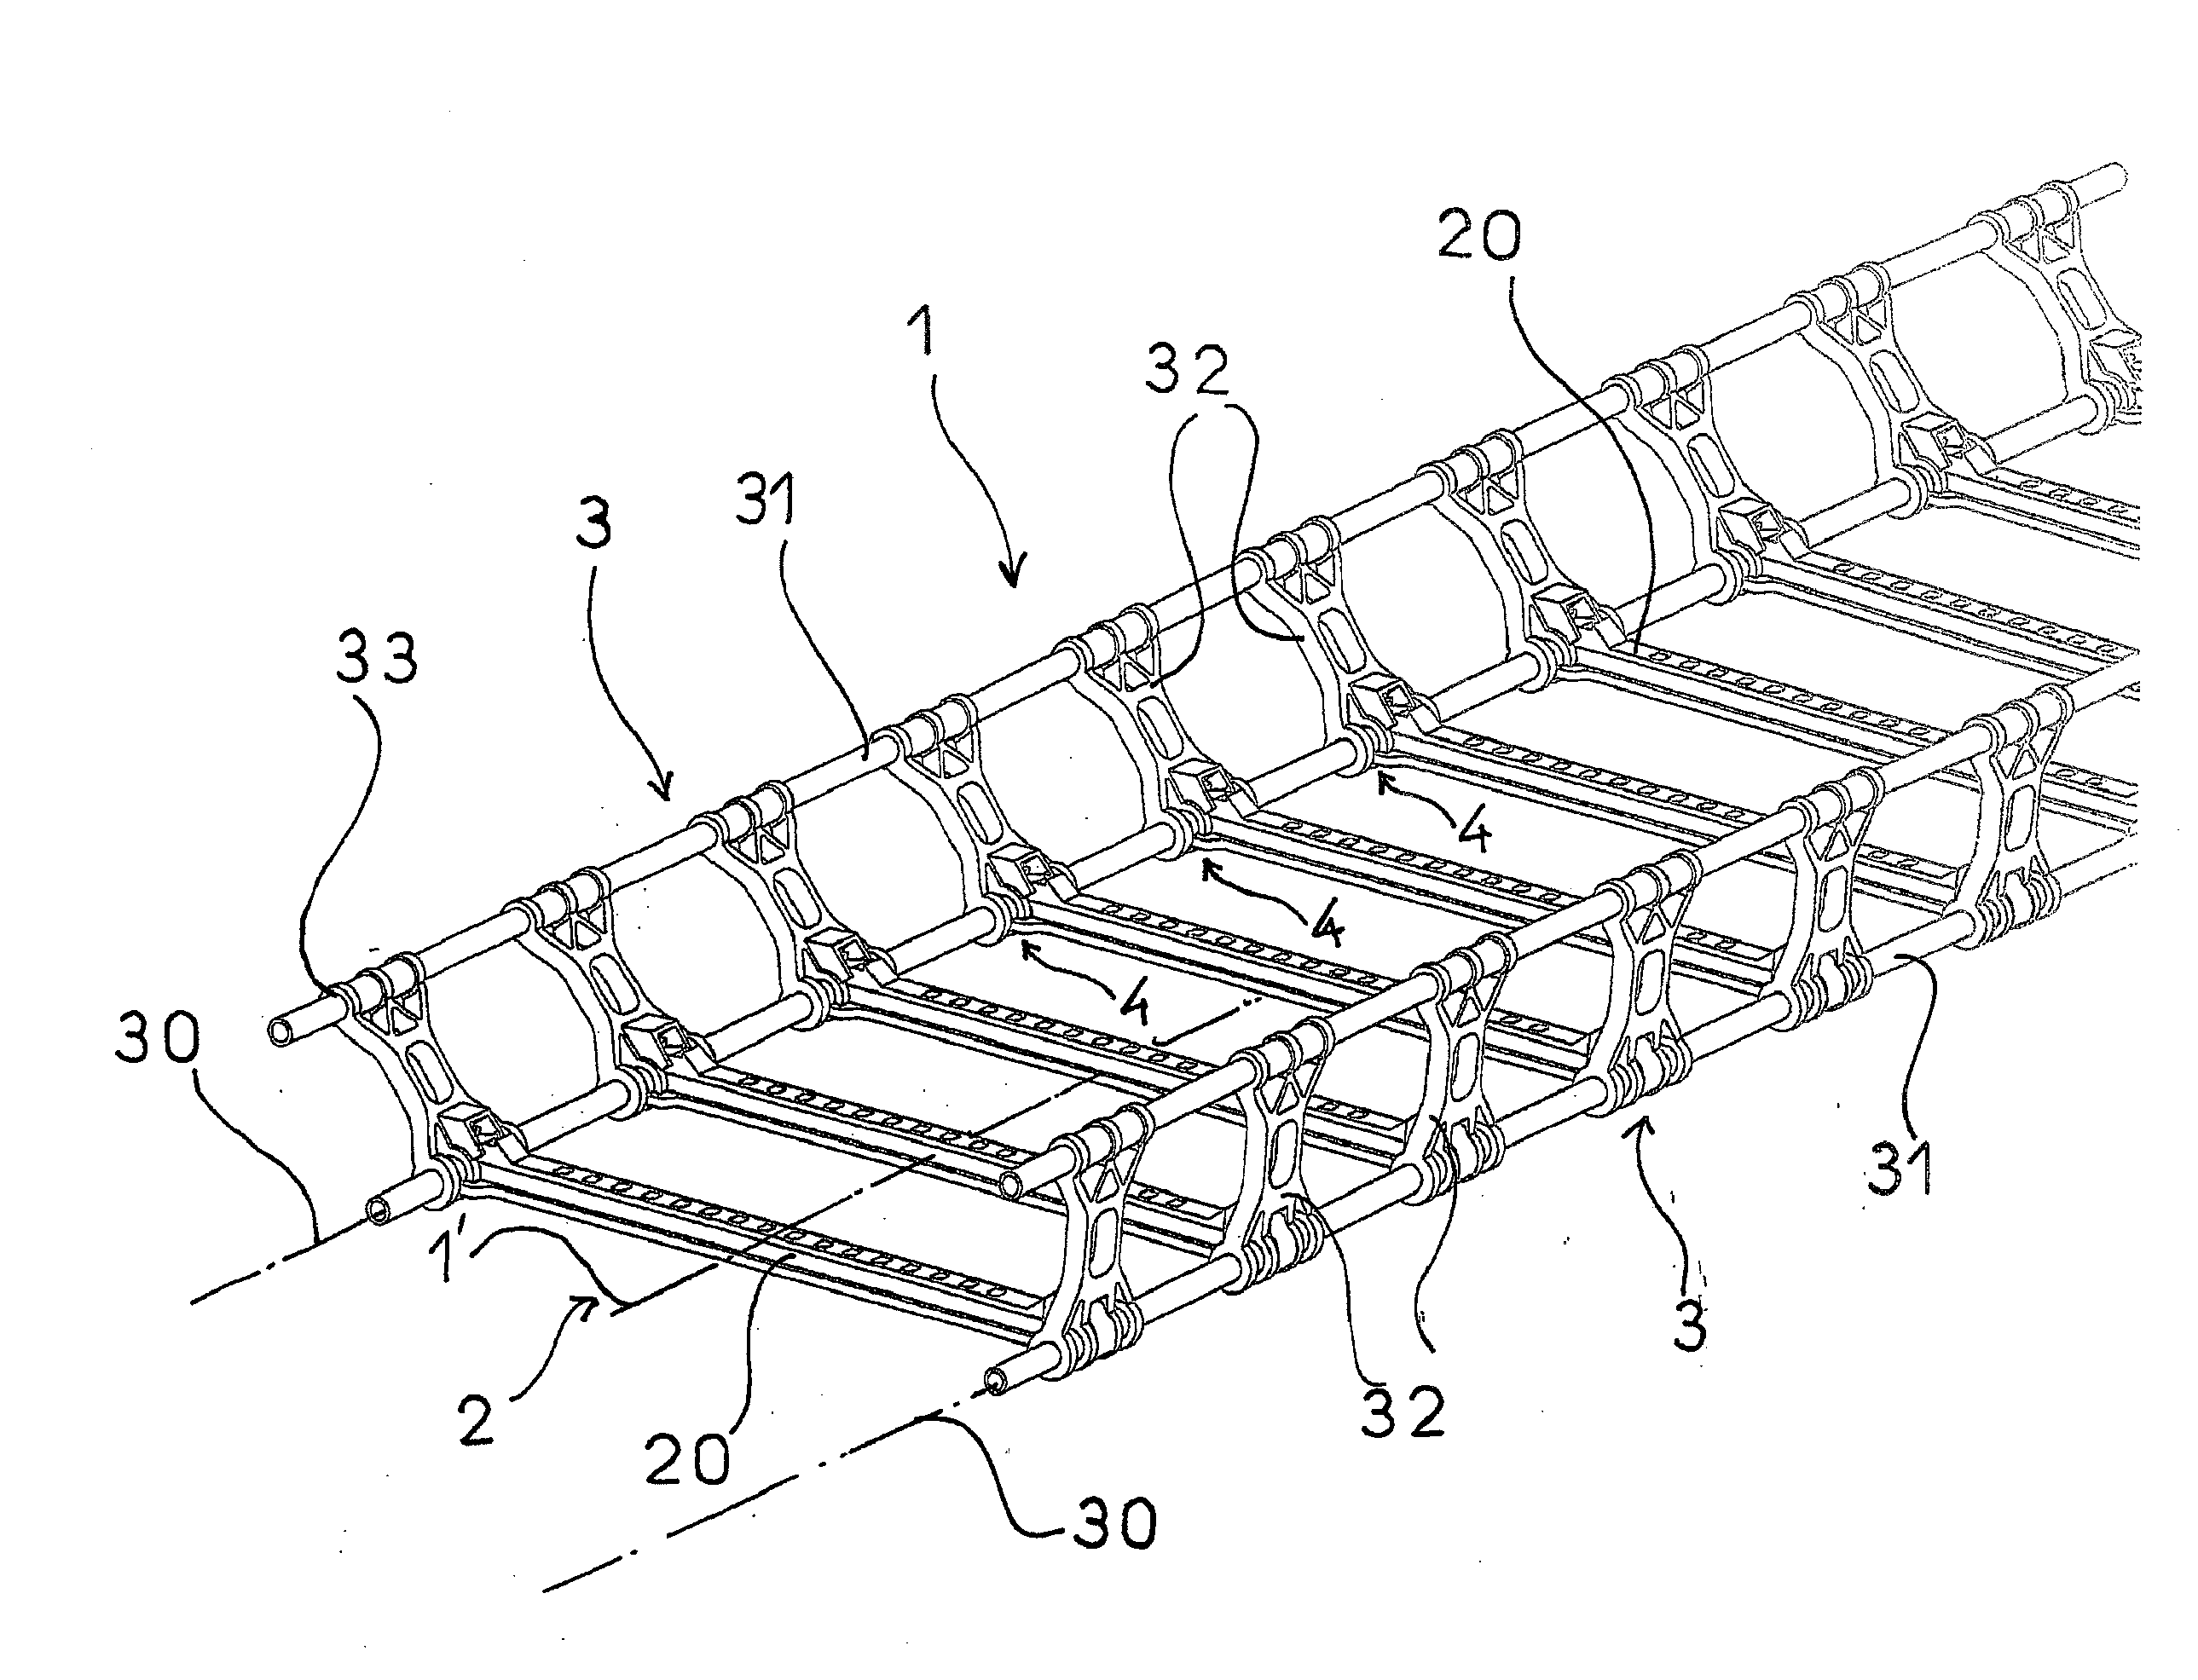 Cable routing device